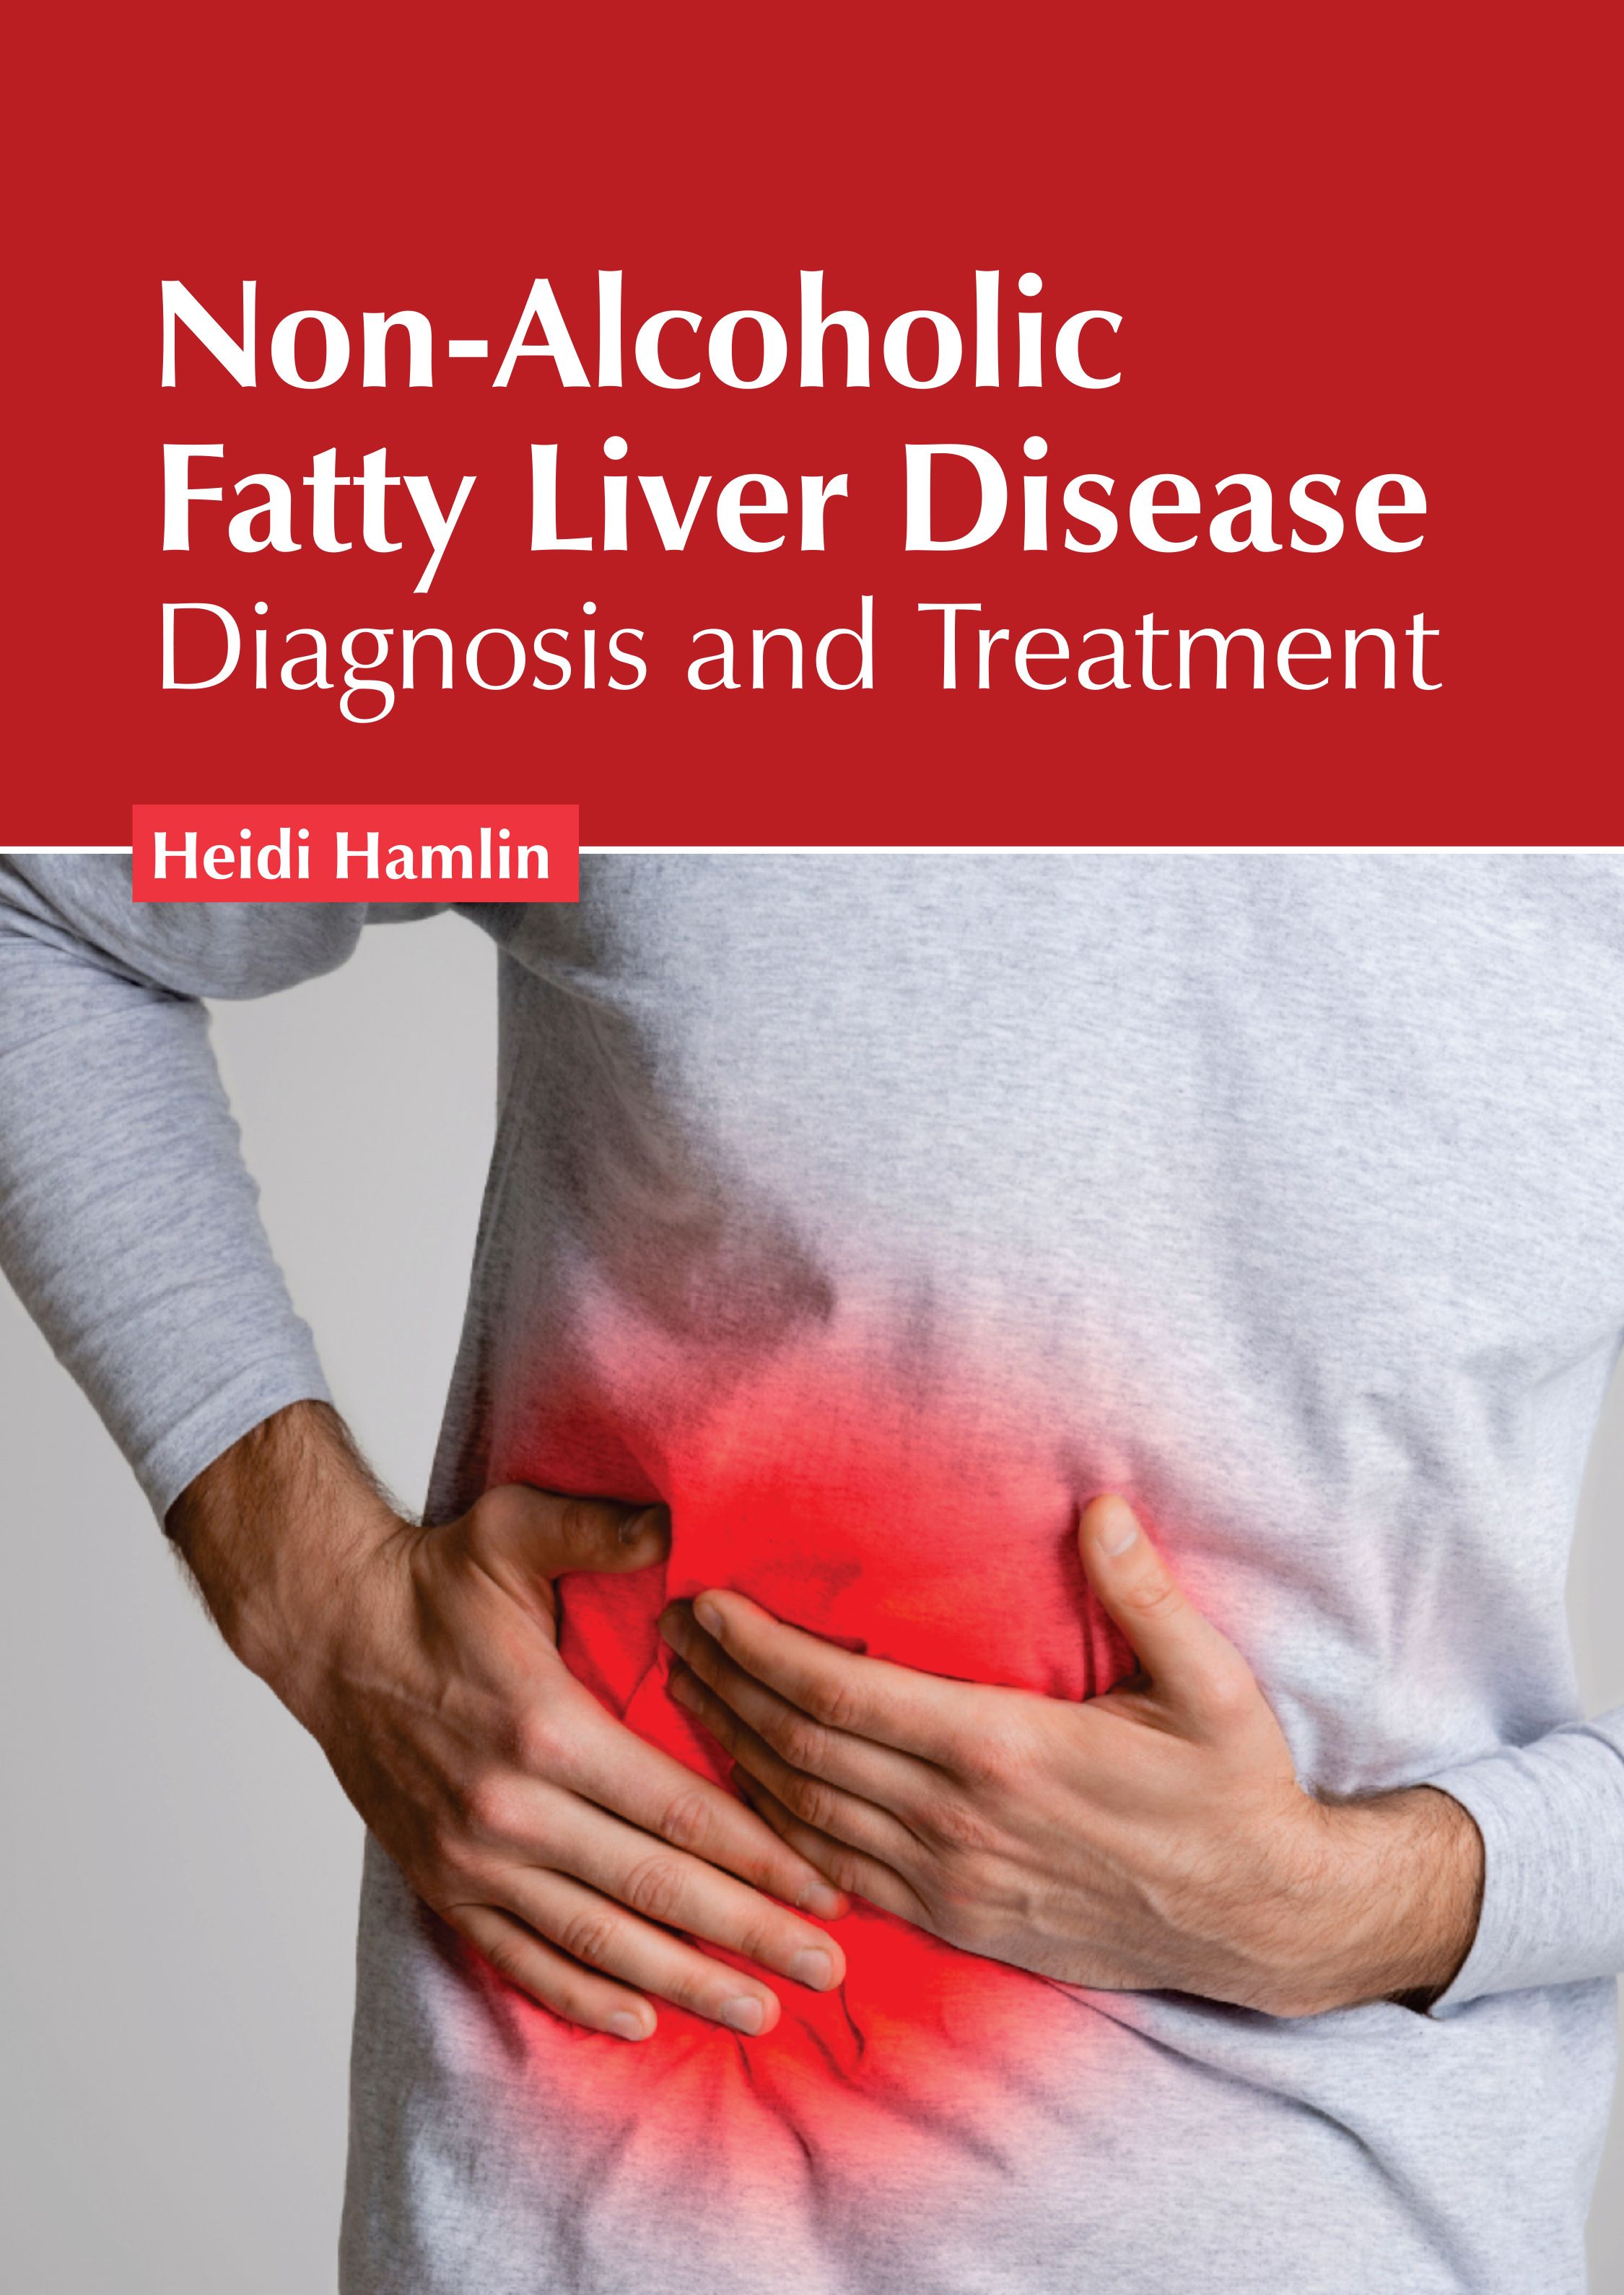 

exclusive-publishers/american-medical-publishers/non-alcoholic-fatty-liver-disease-diagnosis-and-treatment-9781639277568